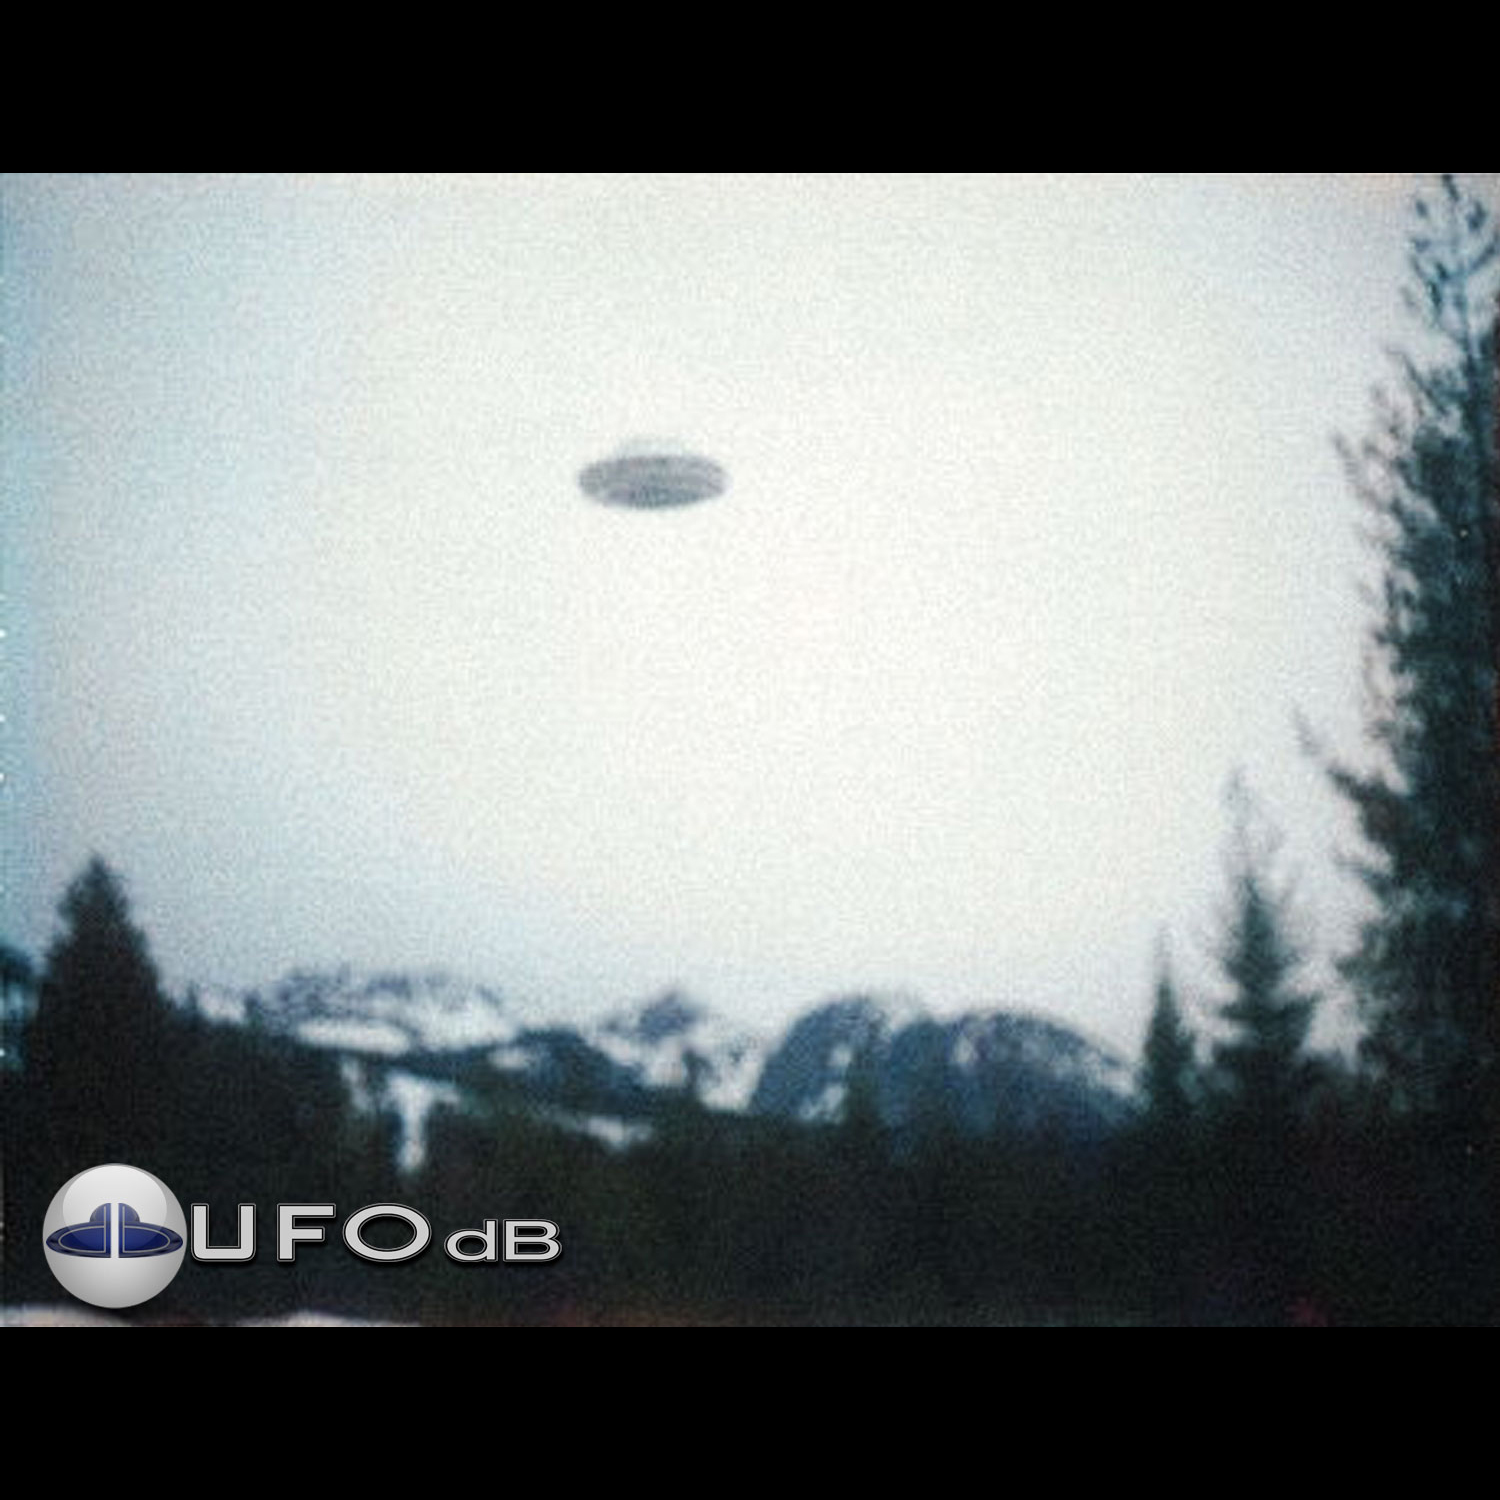 UFO picture showing UFO over snowy mountains during the day UFO Picture #36-1